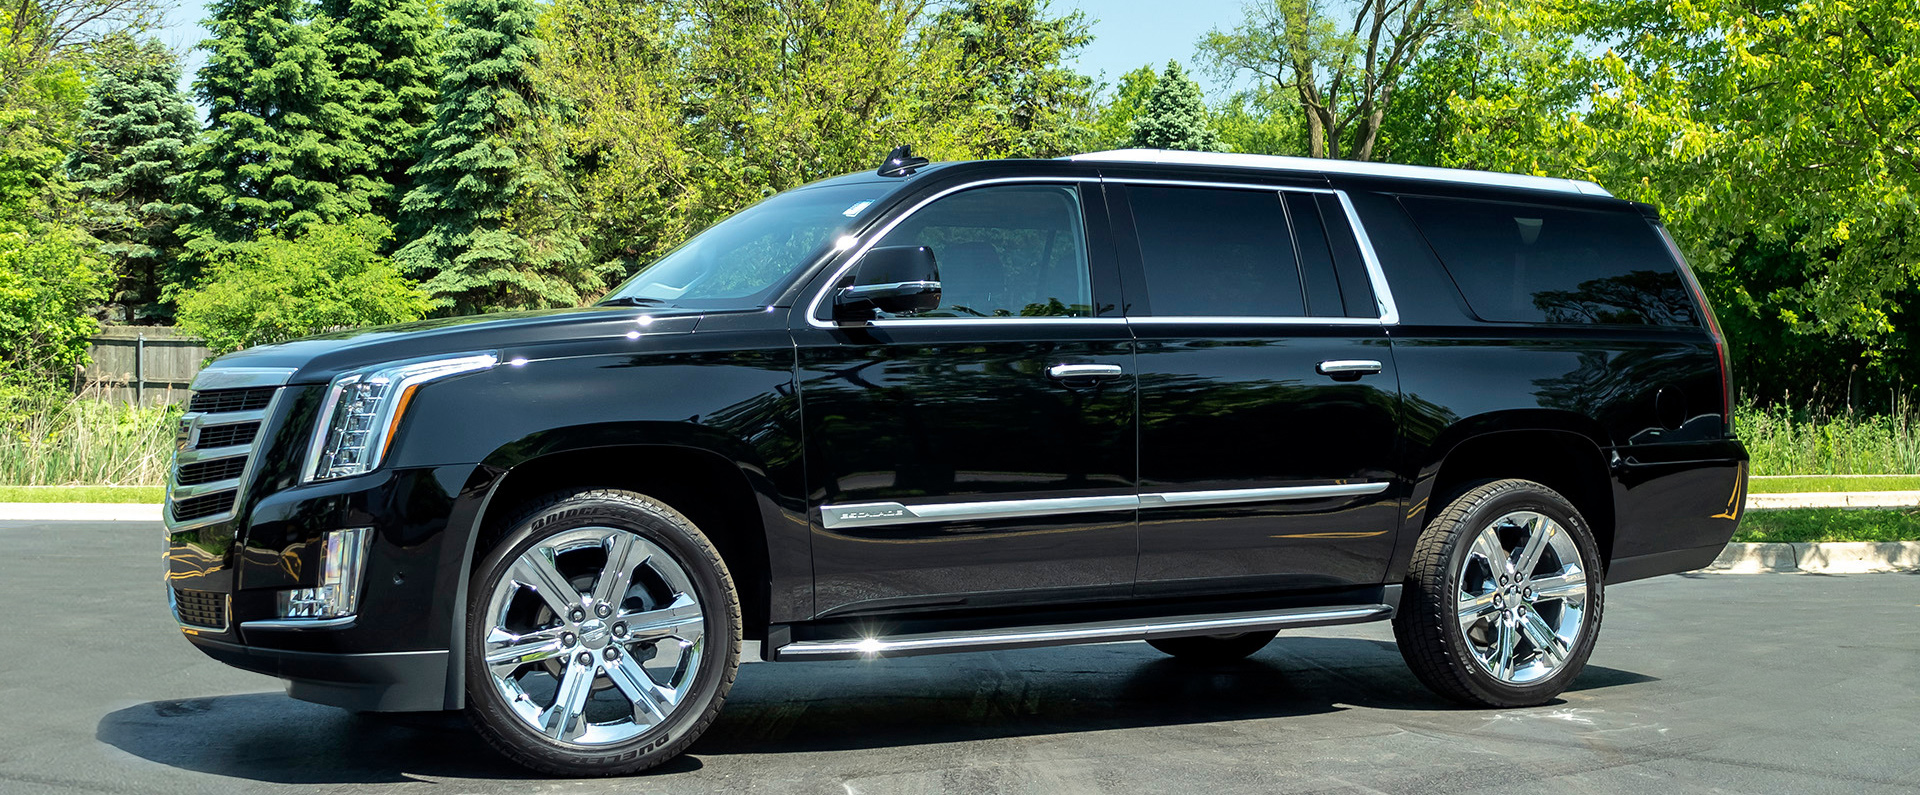 New Canaan Limo SUV